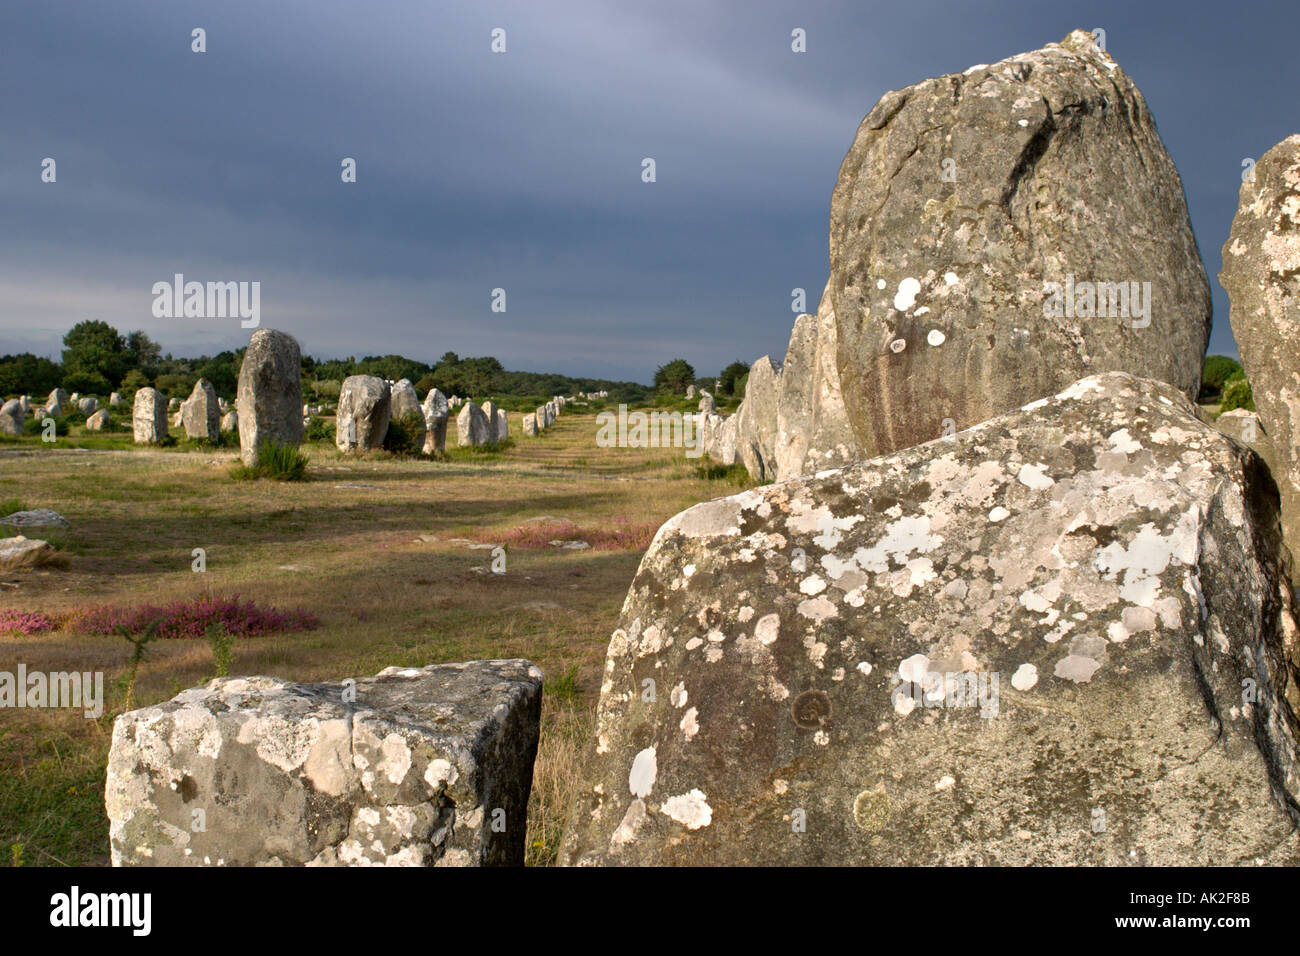 Megaliths in the late afternoon just before a storm, Alignements de Kermario, Carnac, Brittany, France Stock Photo